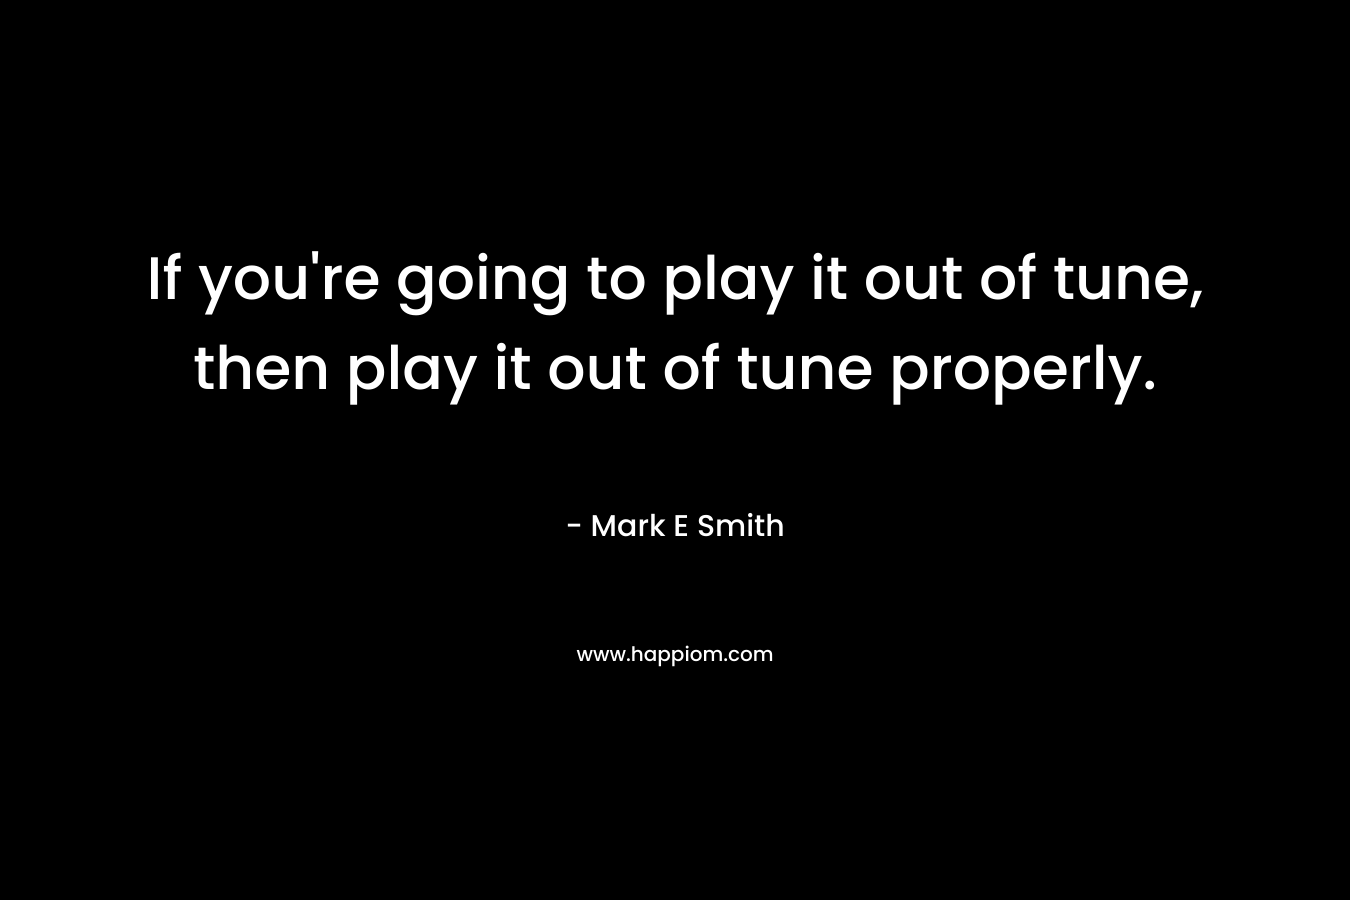 If you're going to play it out of tune, then play it out of tune properly.